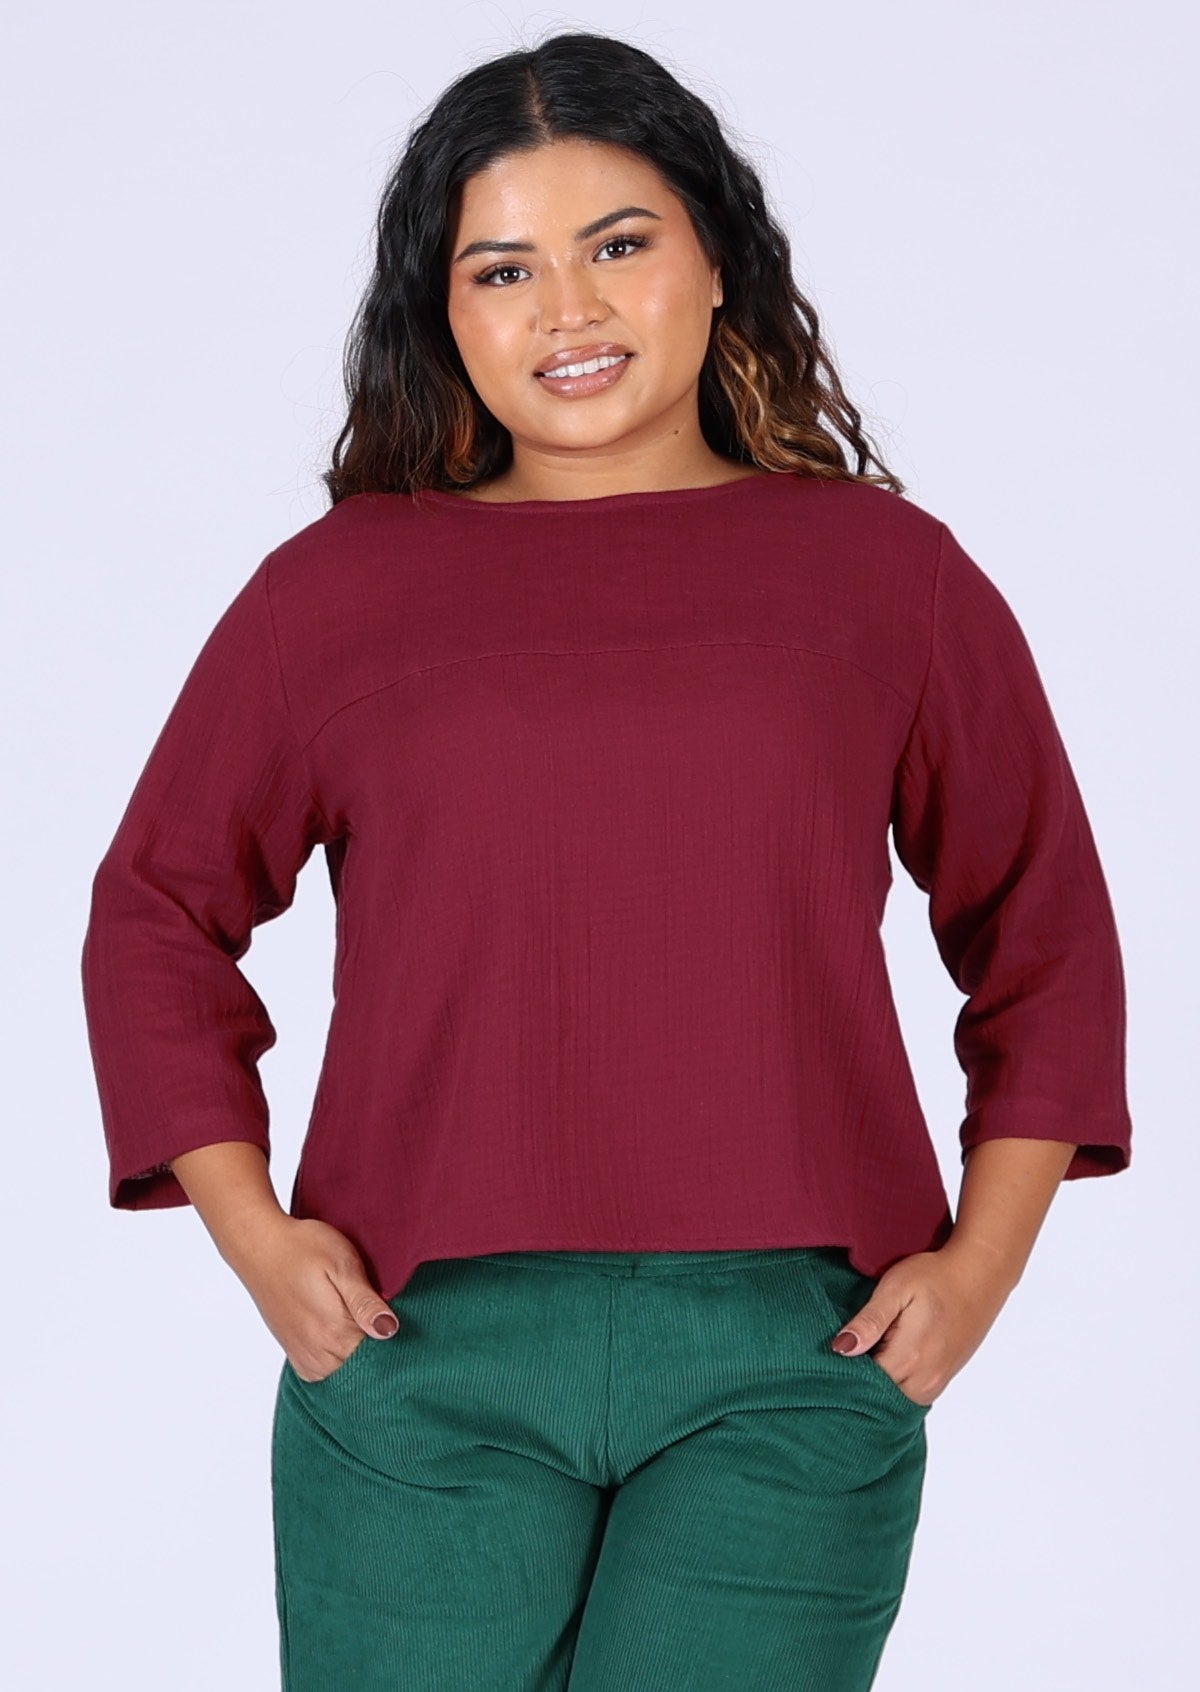 Double cotton top in gorgeous rich warm red looks great over jeans